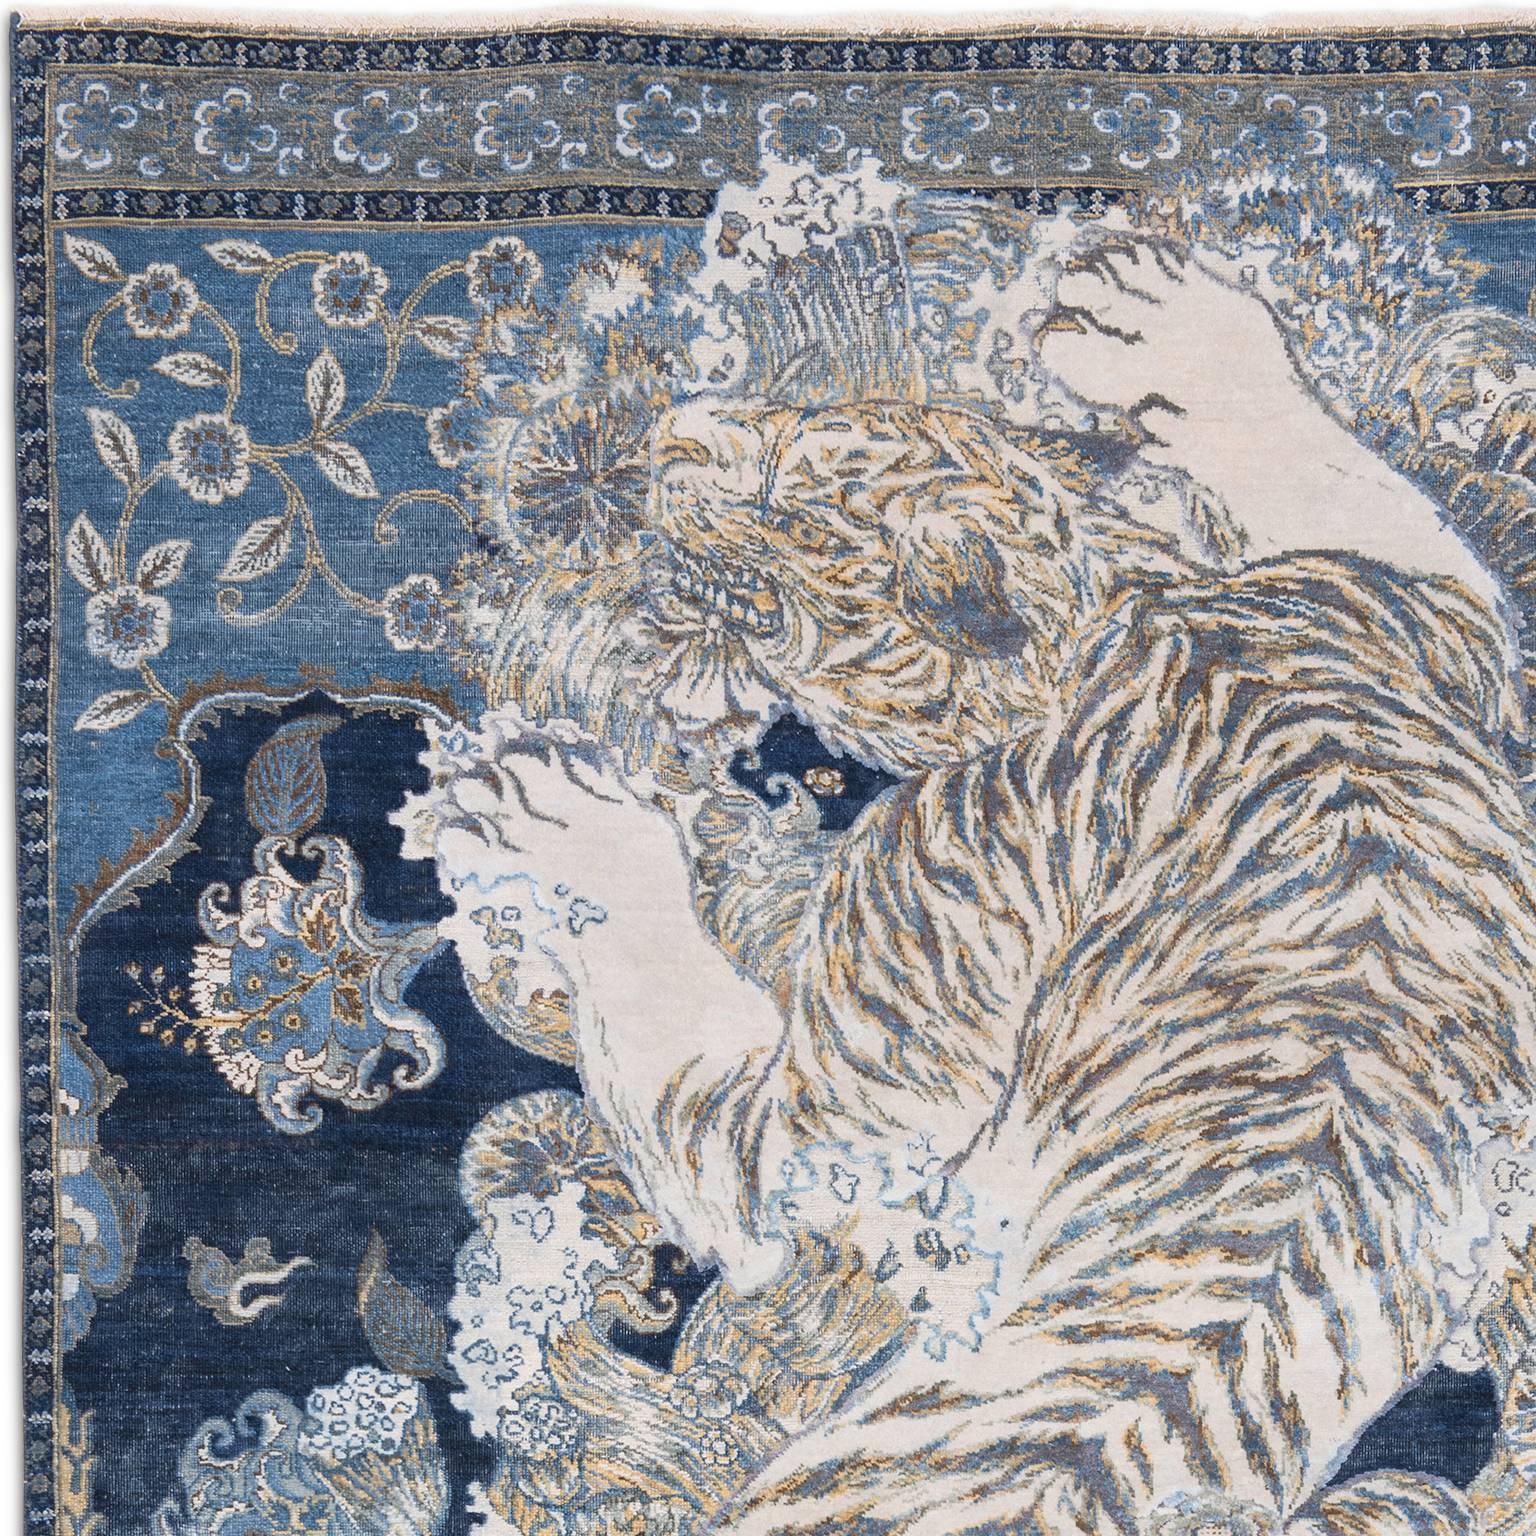 Knots Rugs presents the 17th Century Modern Tibetan Tiger. Produced in Jaipur in 11/11 Persian knot quality from oxidized wool and silk. This piece is number 1/10 of this special Limited Edition collection produced by Knots Rugs. The collection is